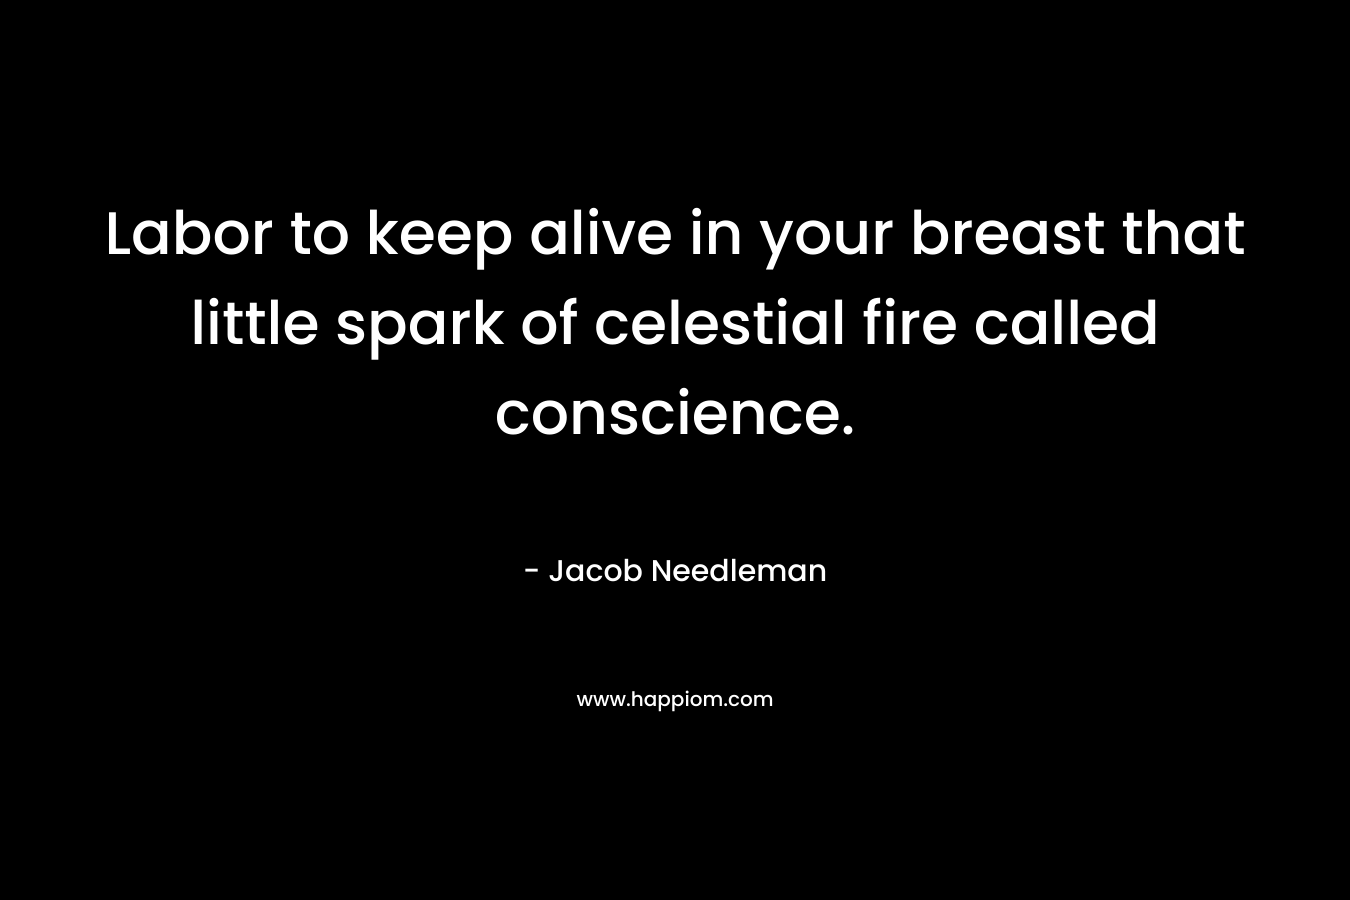 Labor to keep alive in your breast that little spark of celestial fire called conscience. – Jacob Needleman